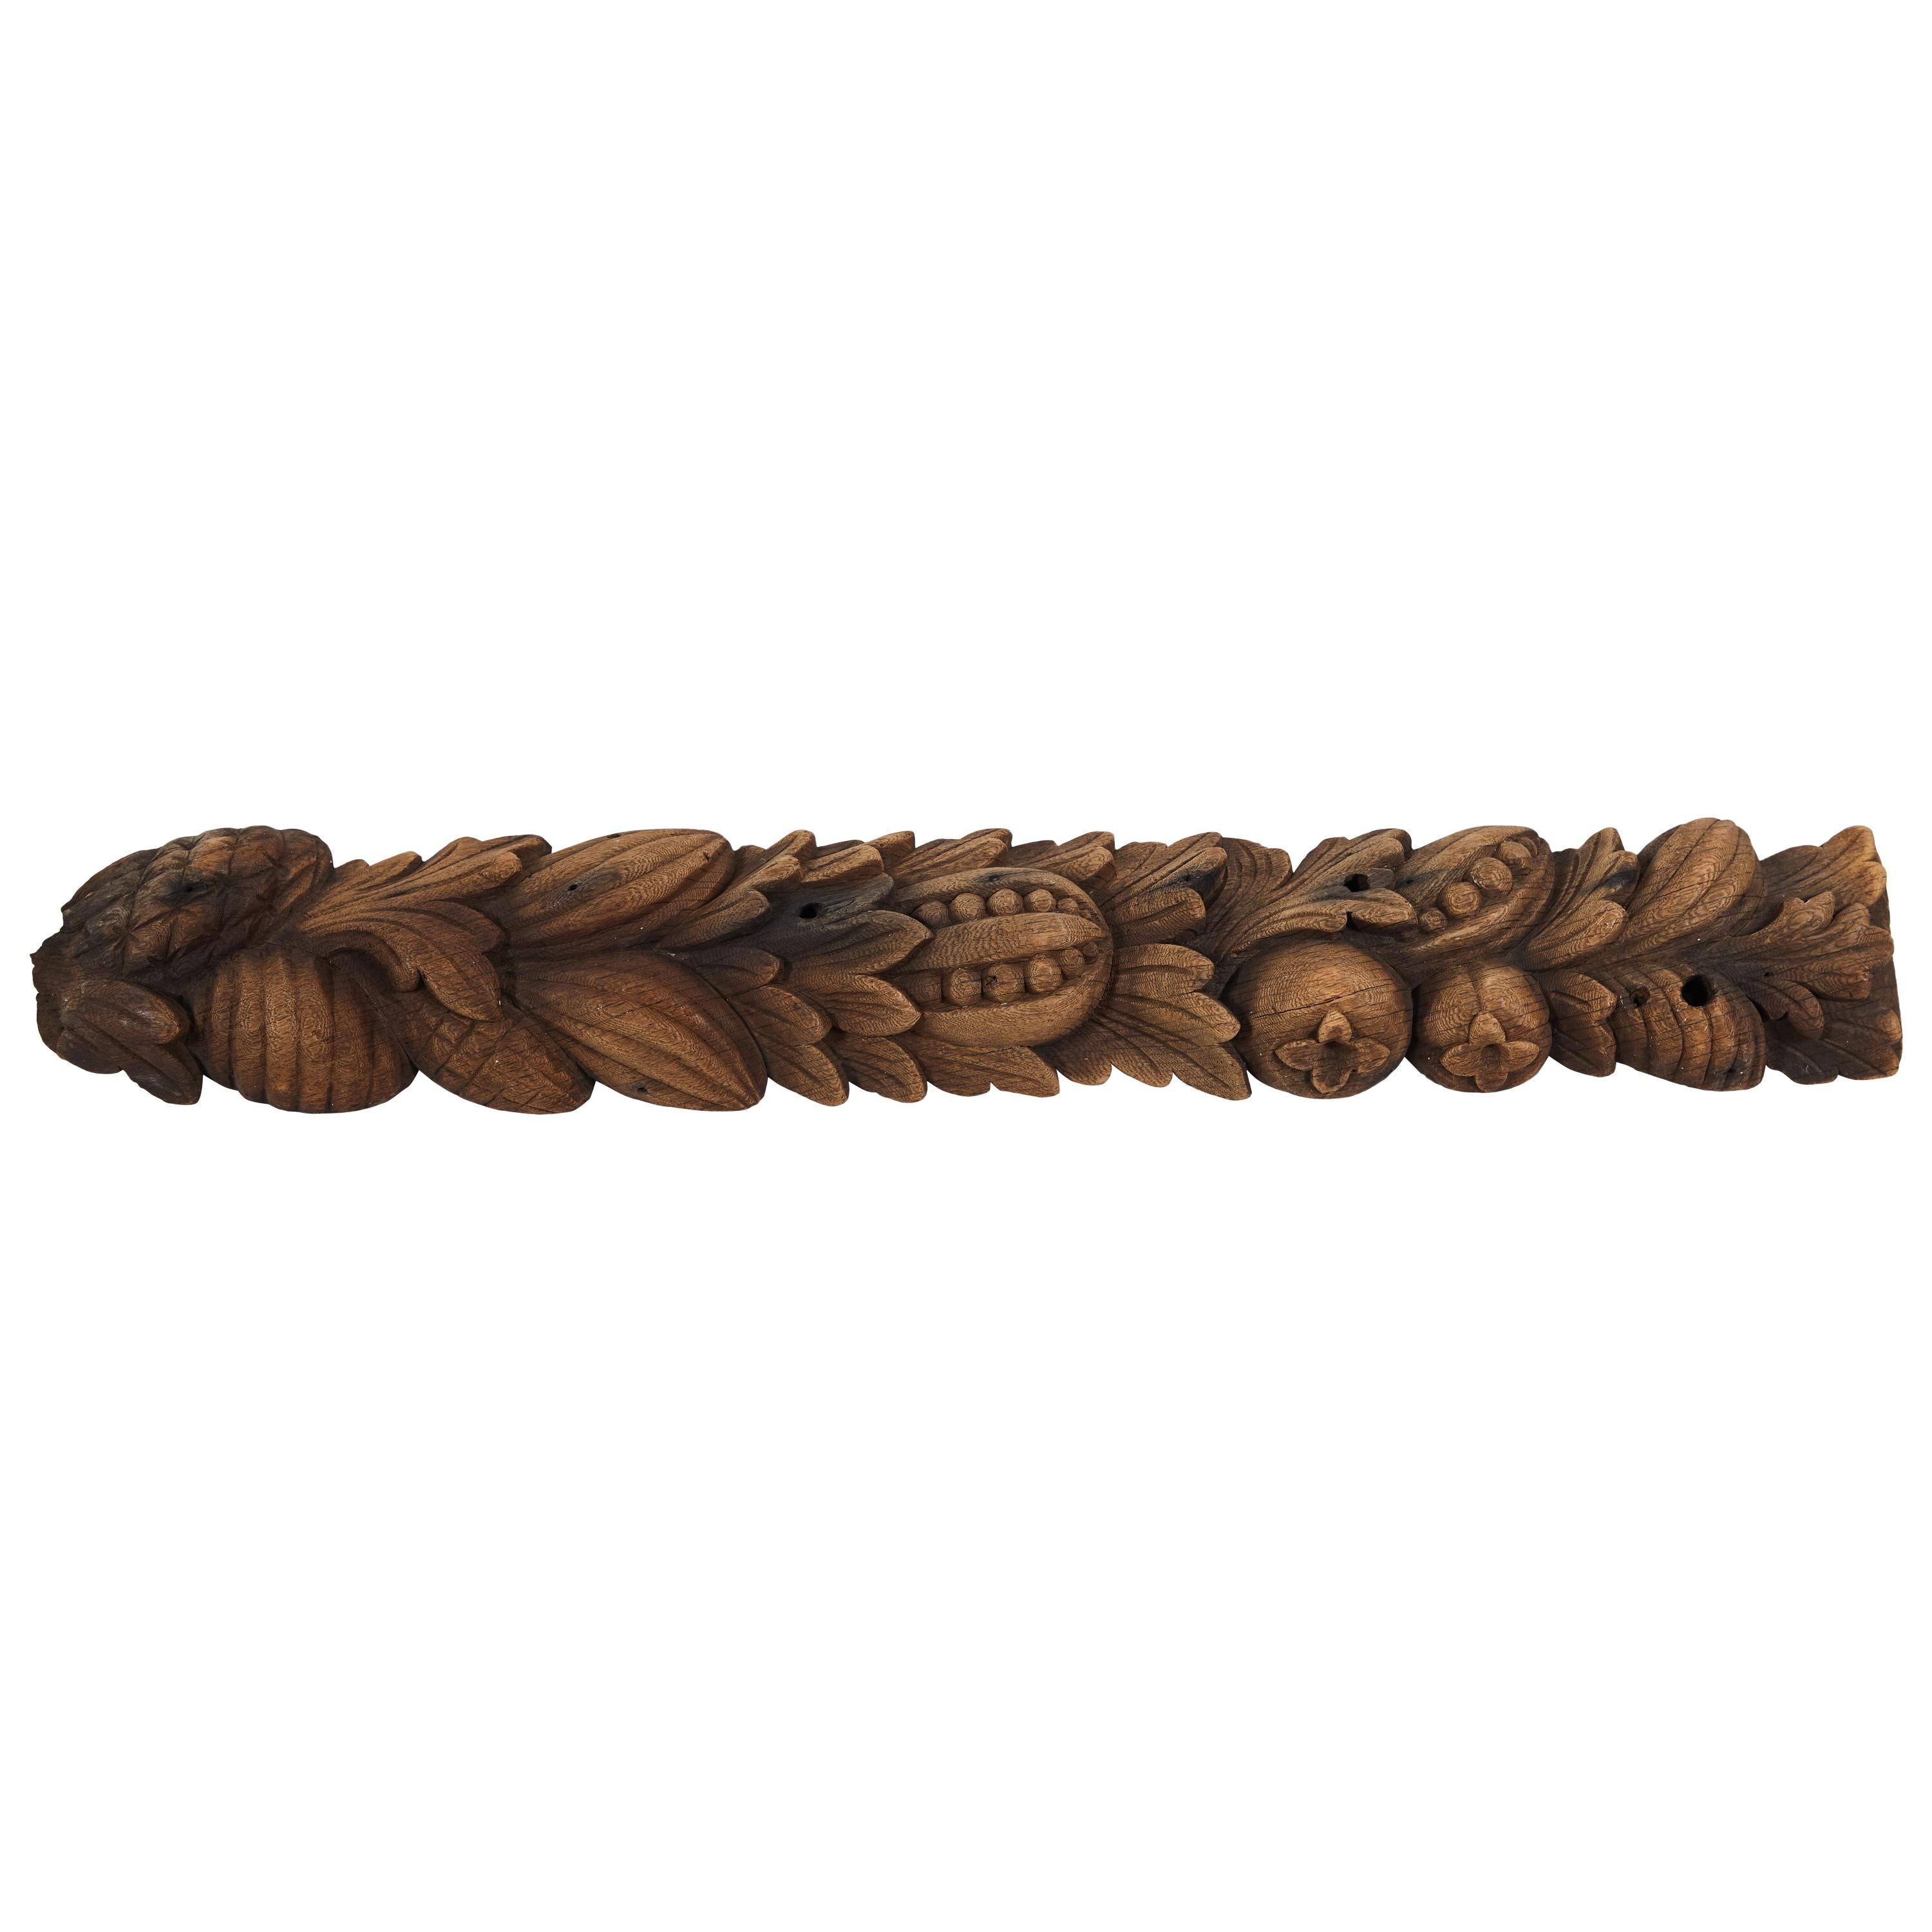 Late 1800s Hand Carved Wooden Architectural Element with Fruit and Leaves